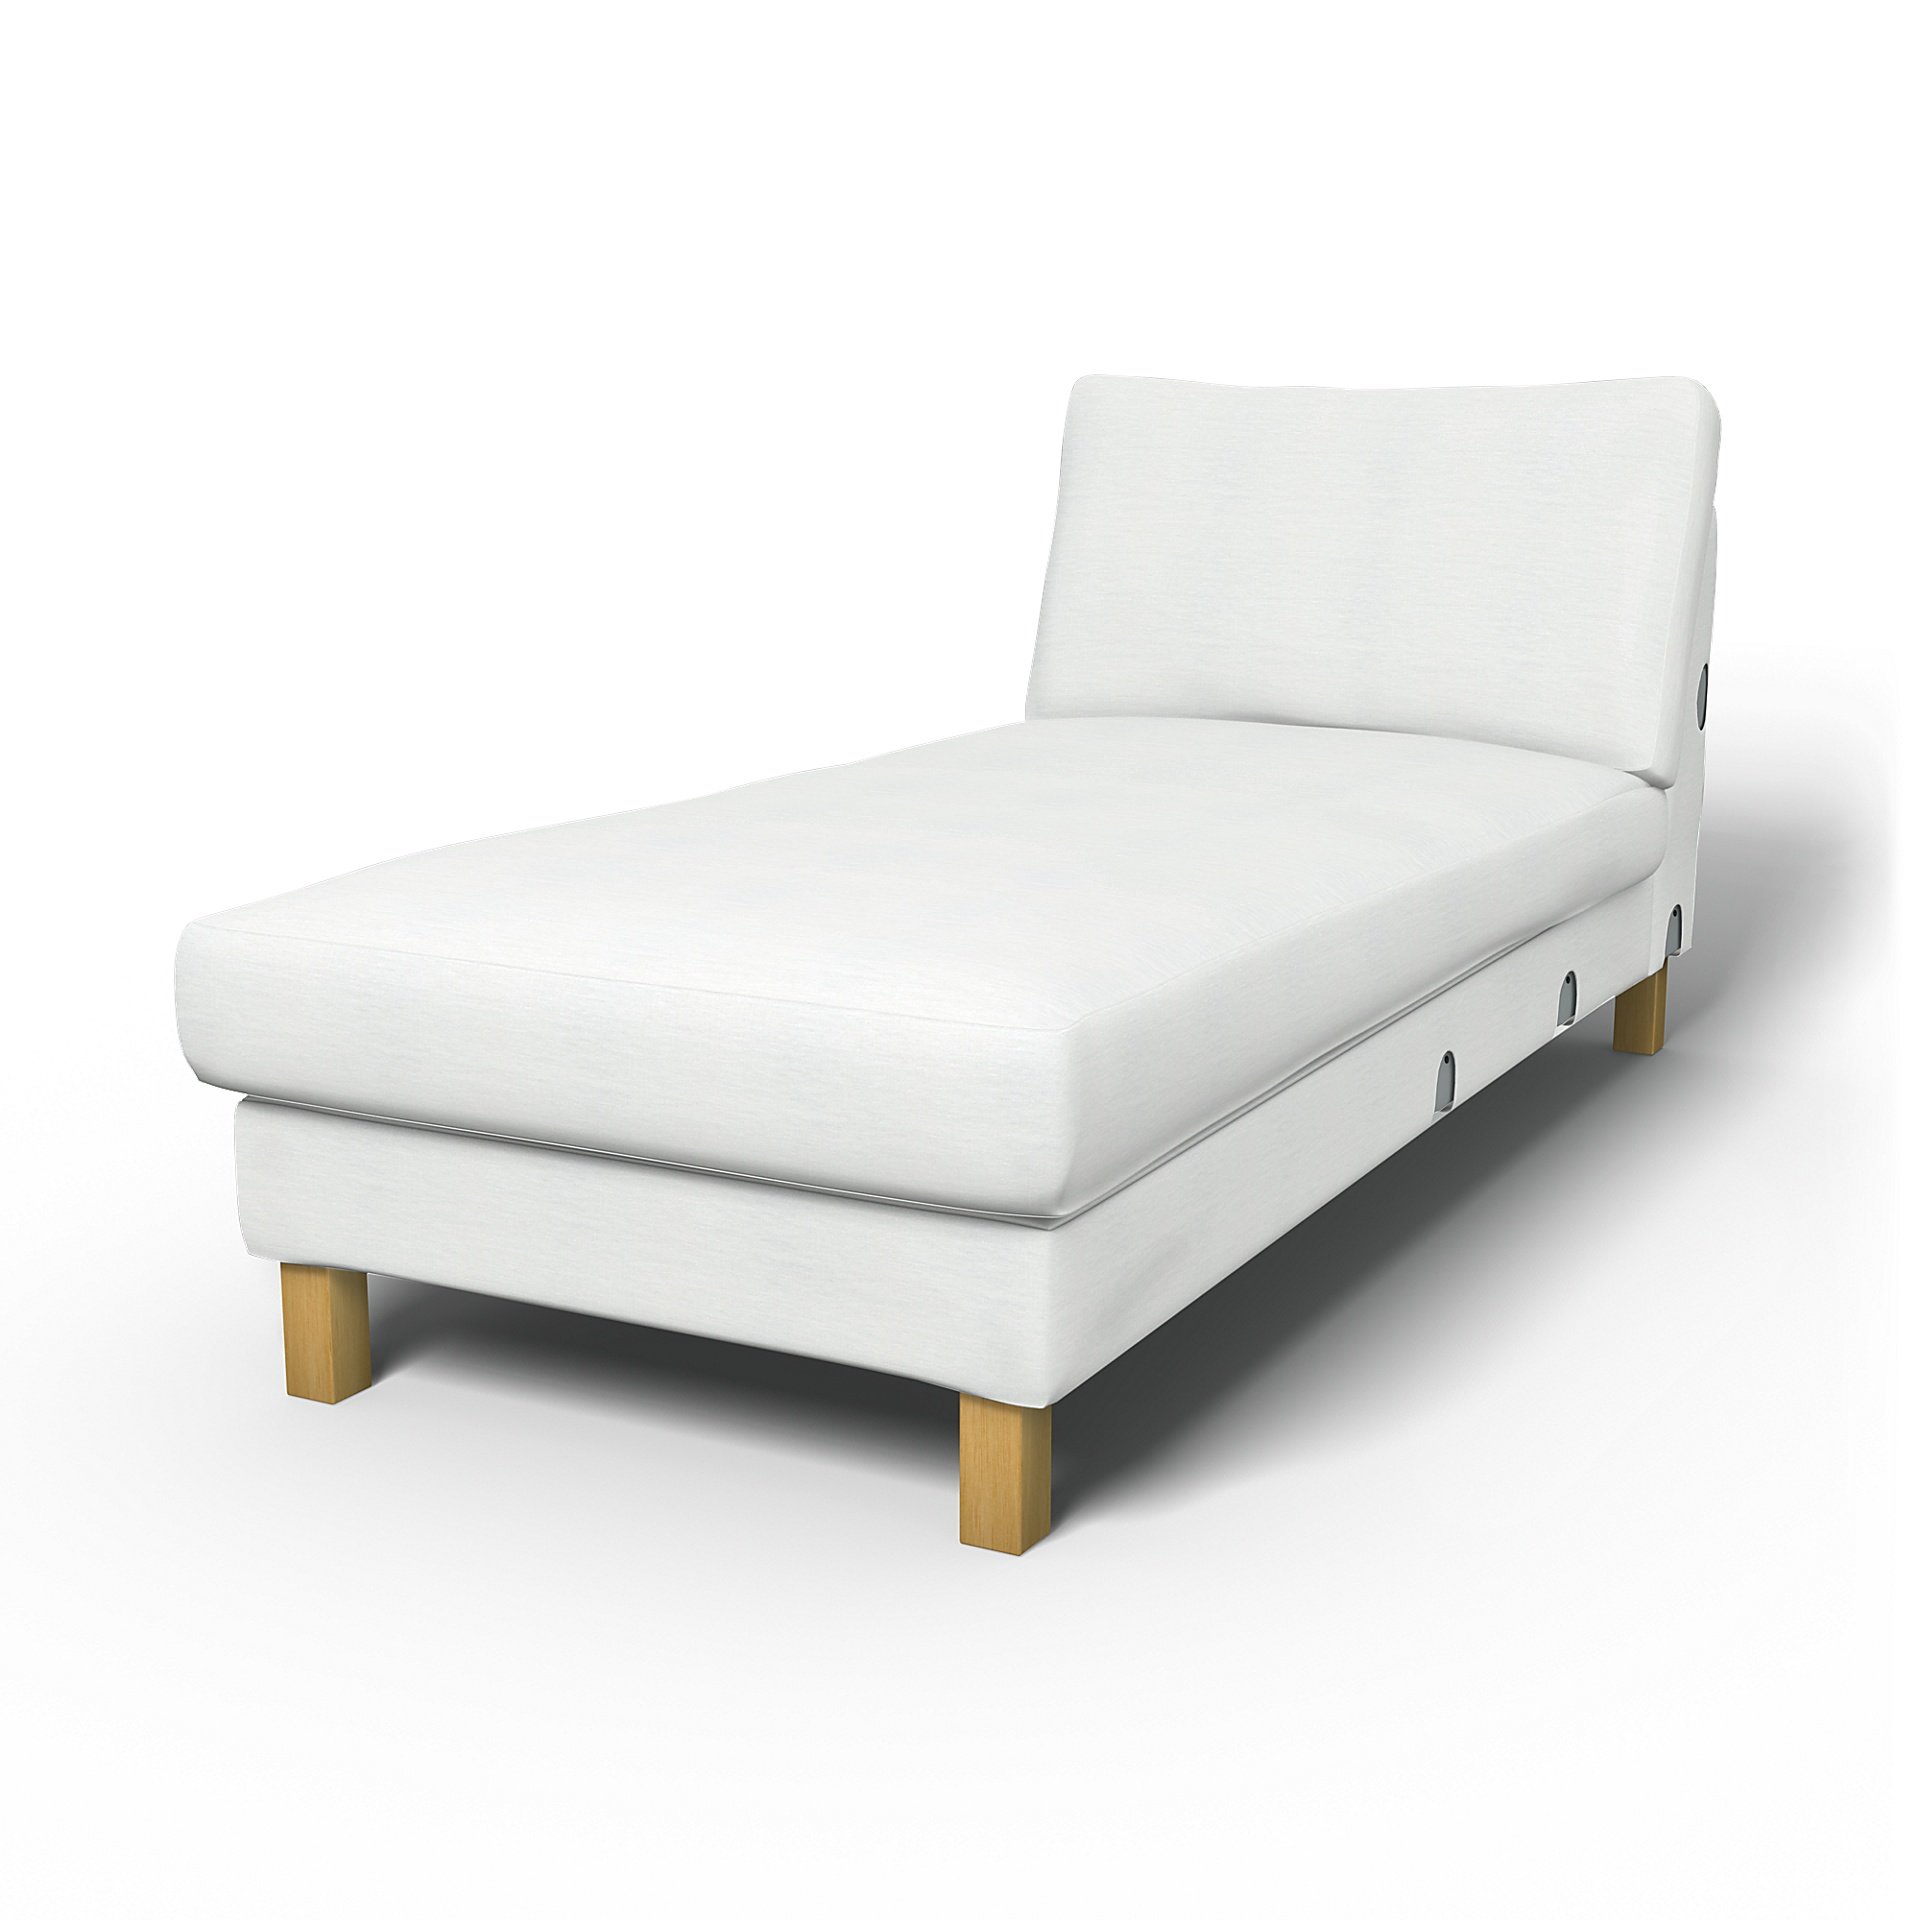 IKEA - Karlstad Chaise Longue Add-on Unit Cover, White, Linen - Bemz